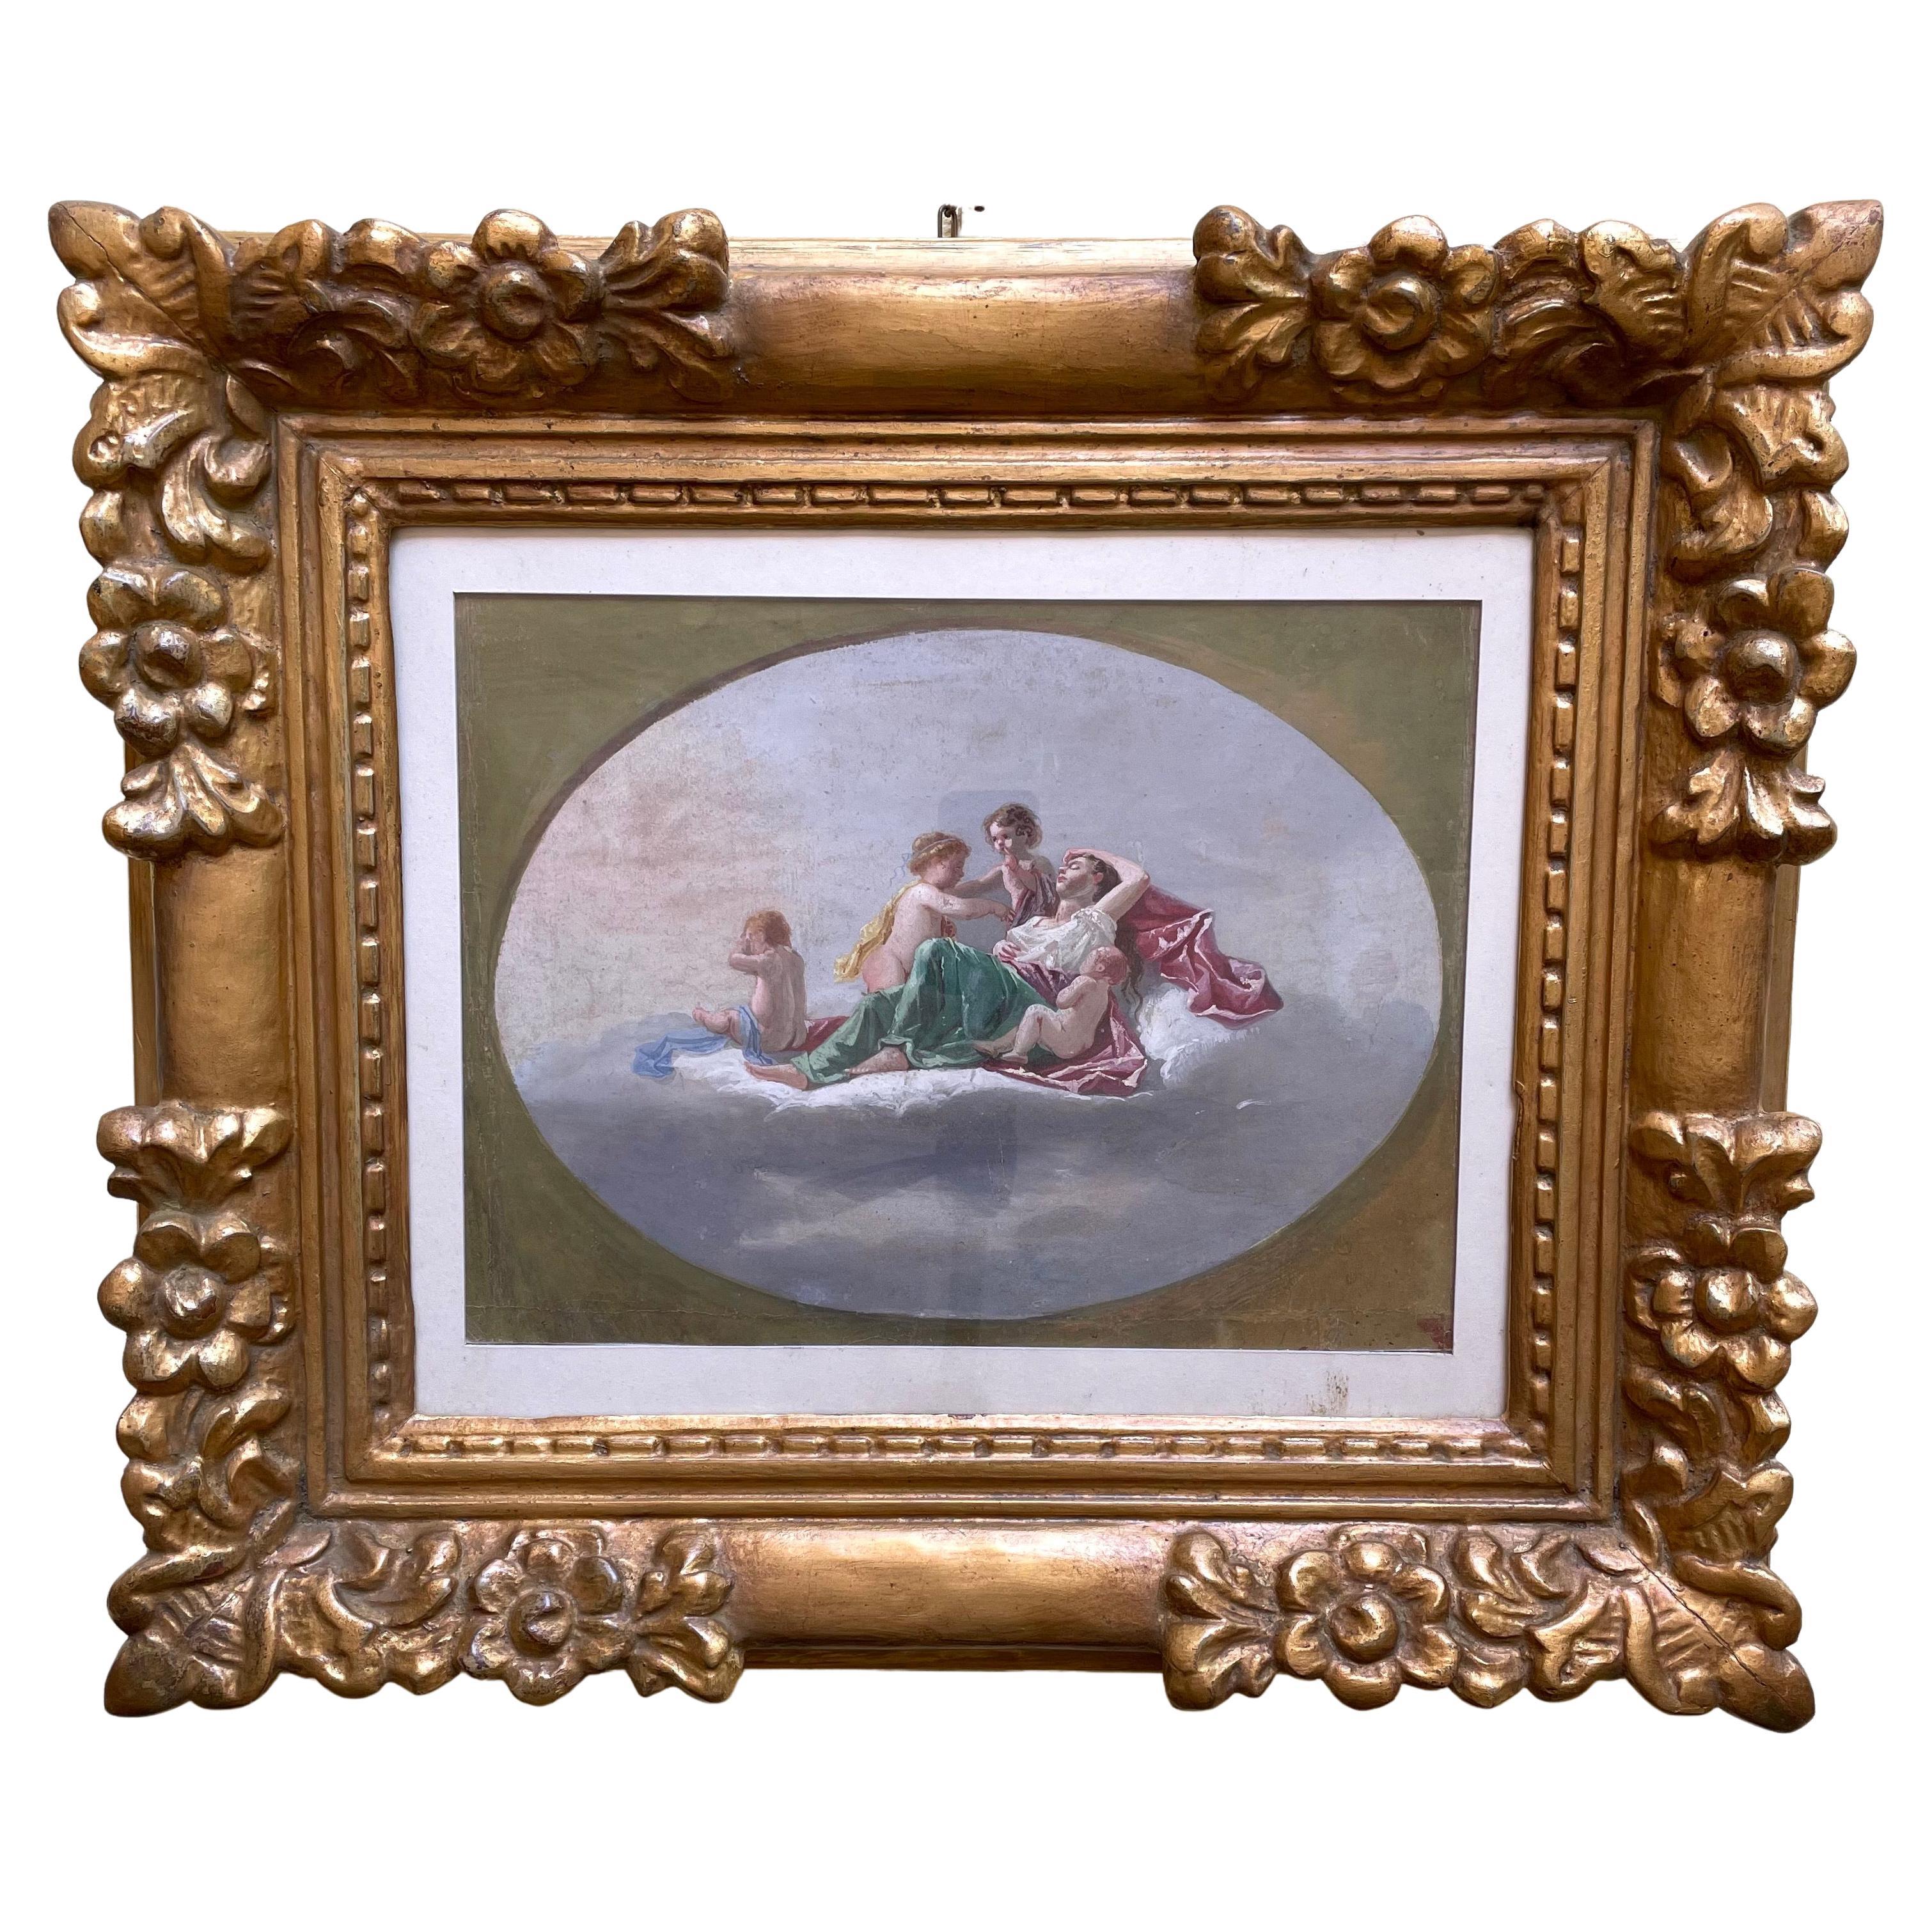 Allegory of ecstasy with Cupid, an 19th century Italian tempera and watercolor painting, oval composition within a rectangular greenish frame.

The painting depicts the dream, the ecstasy of a woman lying on a cloud and surrounded and guarded by